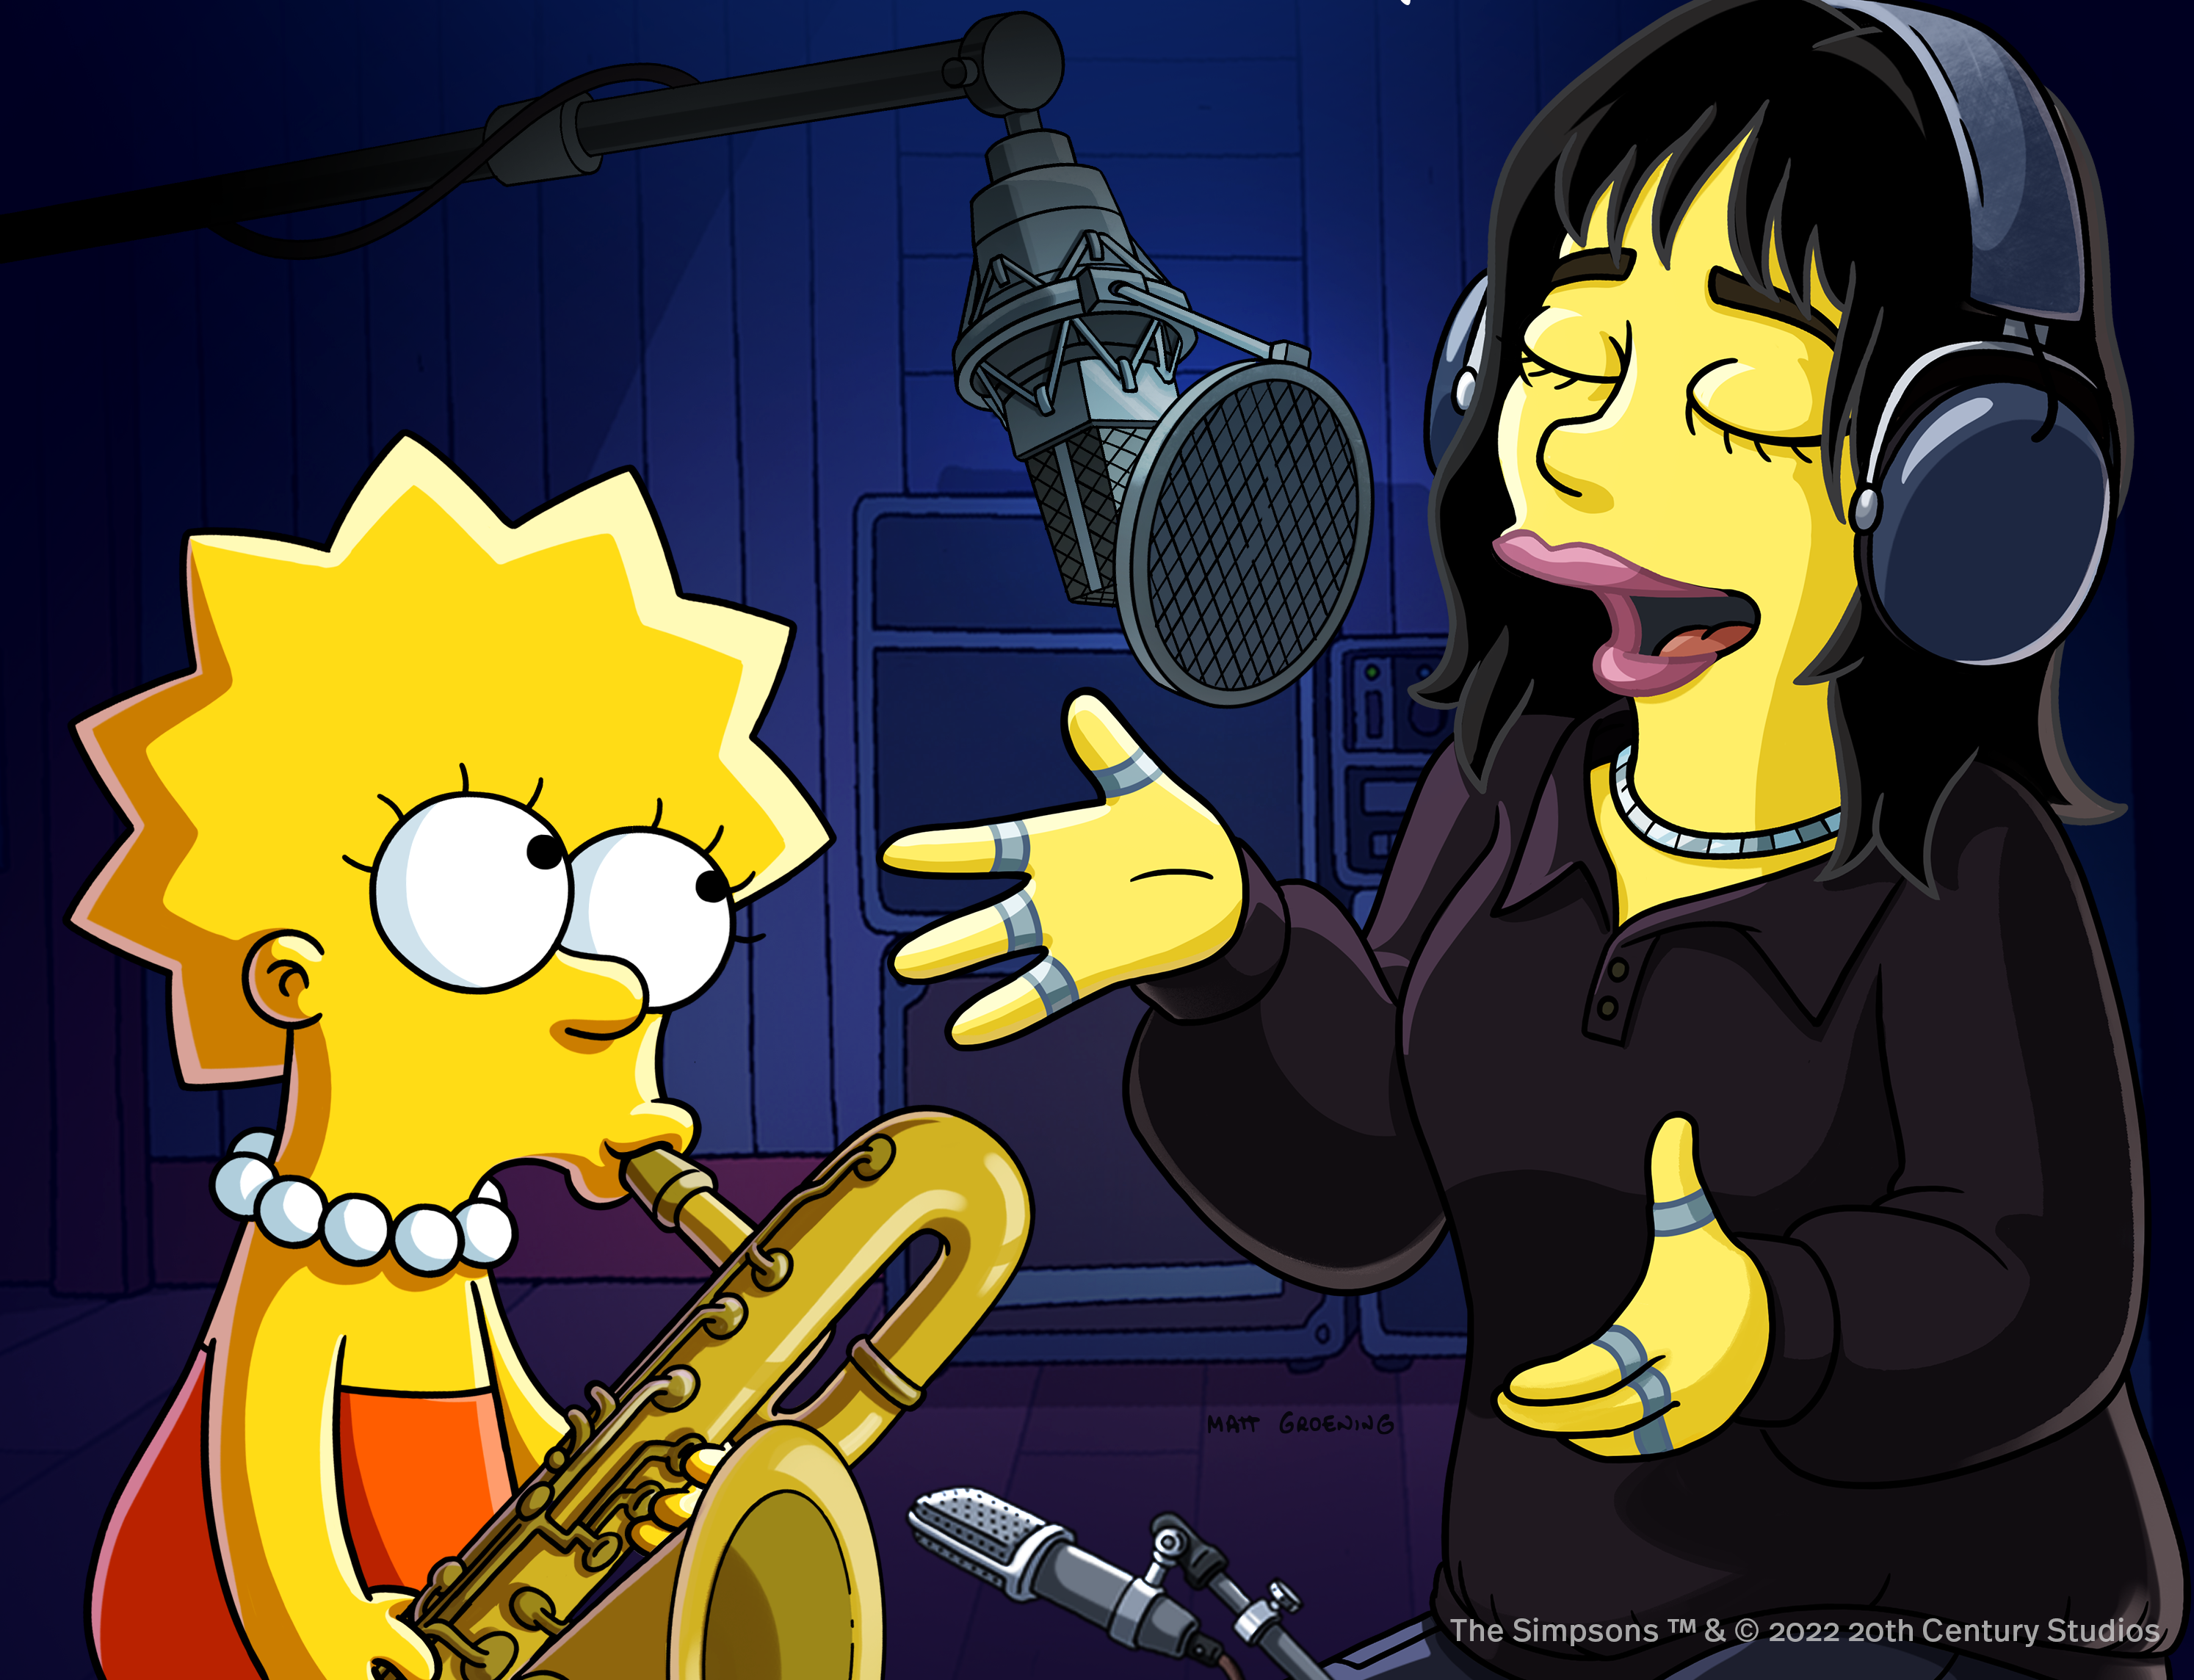 Billie Eilish To Join A Long List Of Celebrities Appearing On The Simpsons